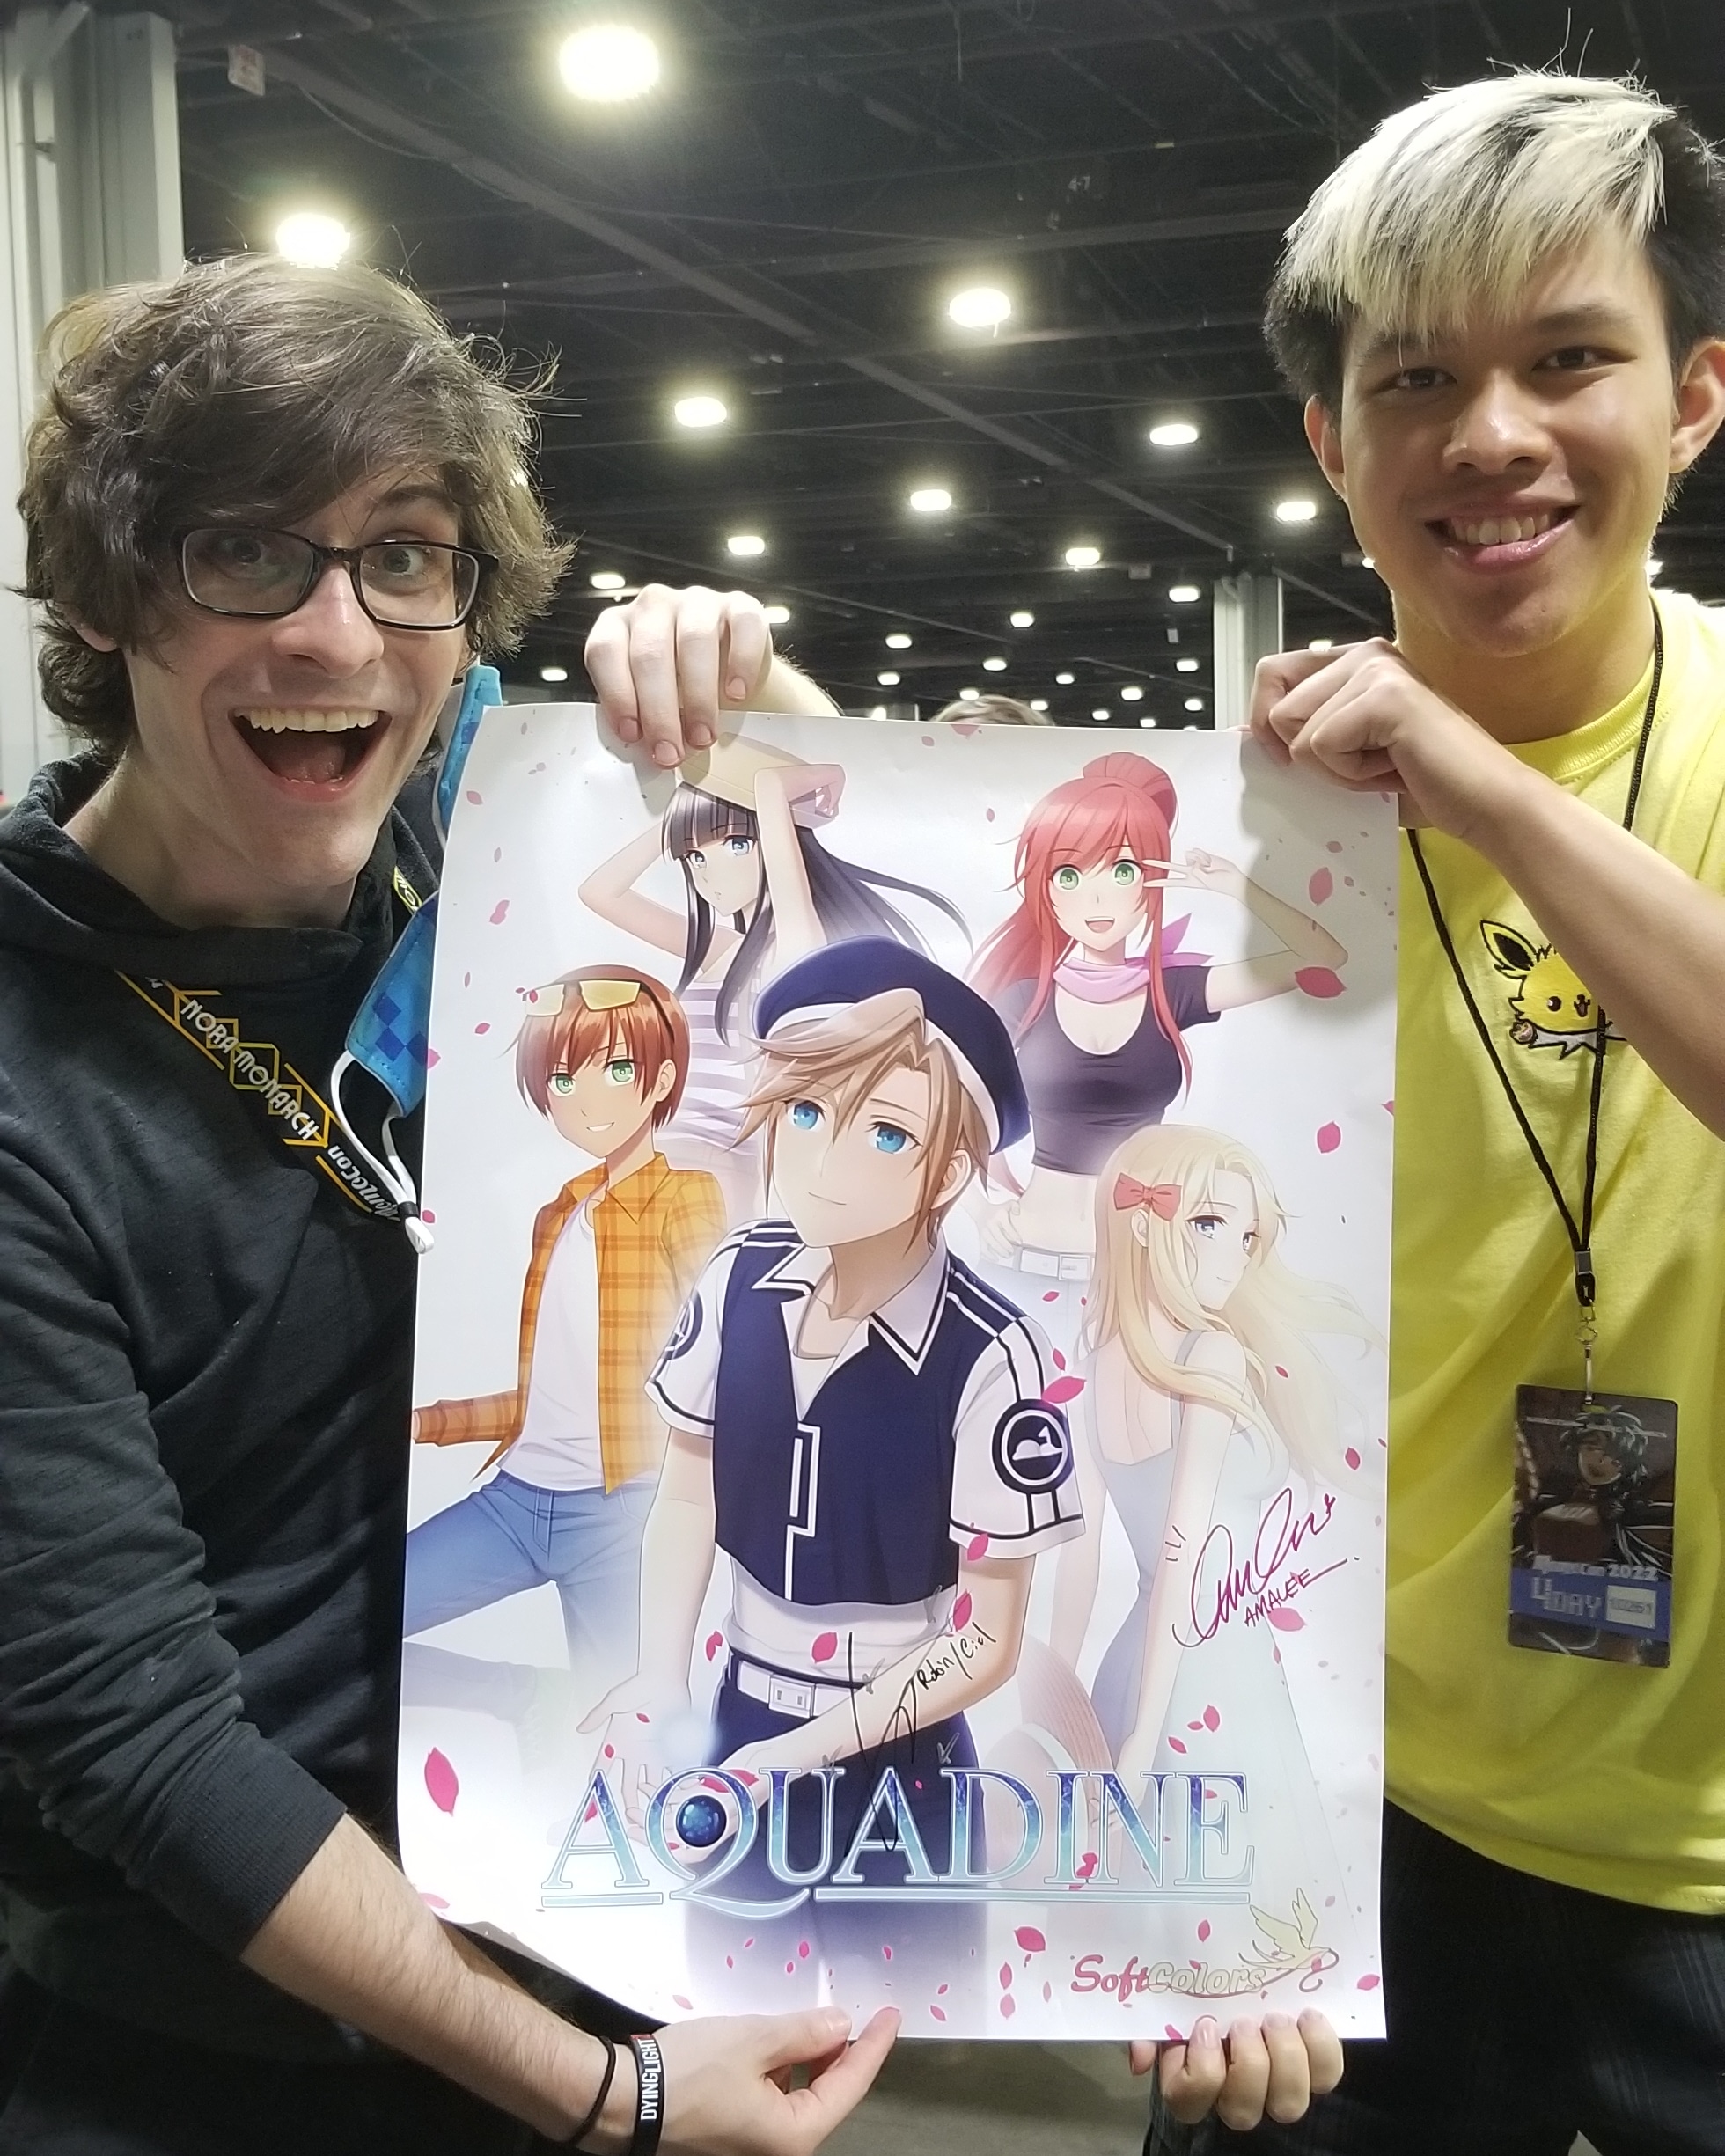 voice actor of main character in Aquadine posing with the lead developer of Aquadine, Brian @softcolors